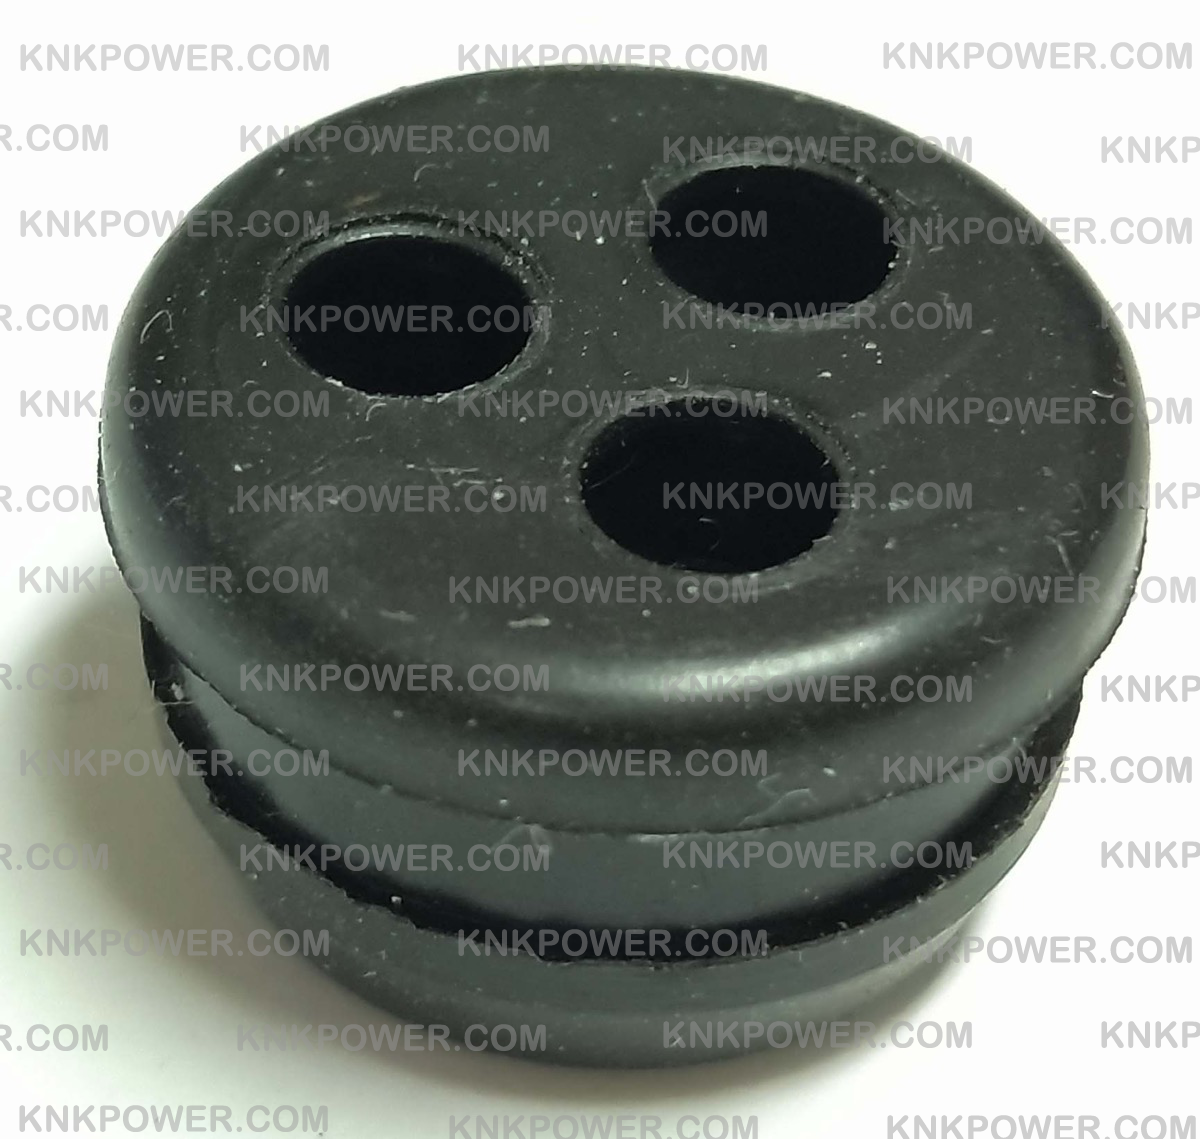 knkpower [7659] PRIMARY CORD GROMMET